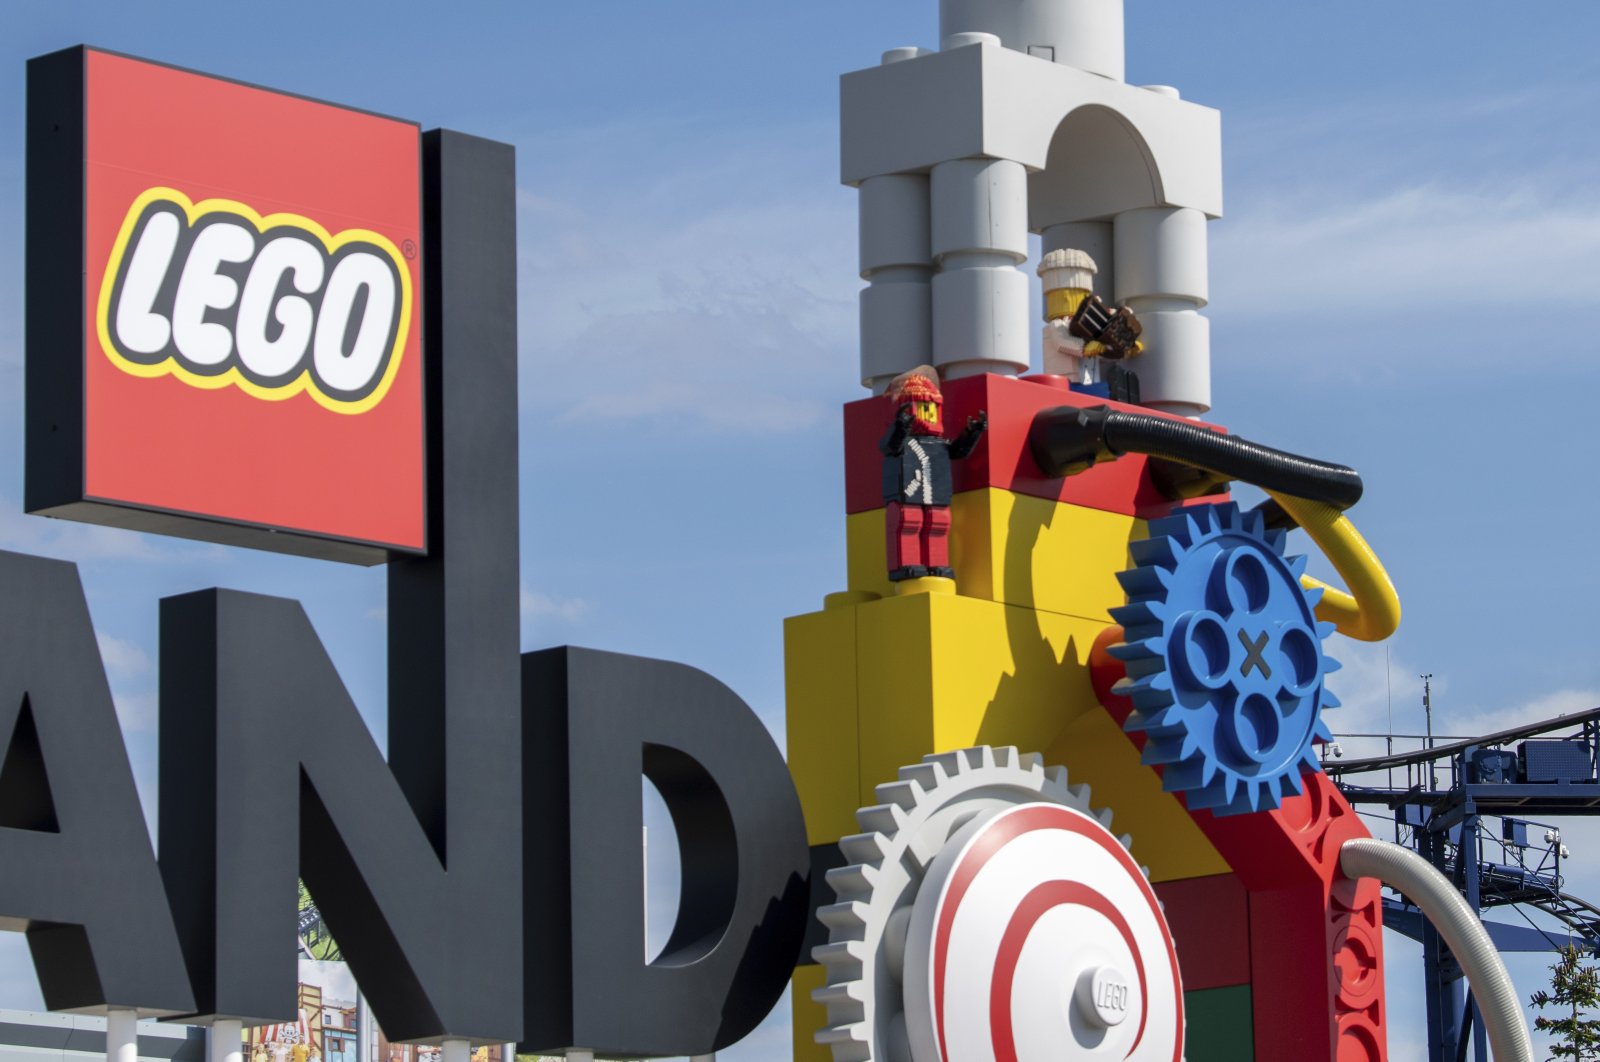 A roller coaster can be seen next to the Lego logo at the entrance to the Legoland amusement park in Guenzburg, southern Germany, Aug. 11, 2022. (dpa Photo via AP)